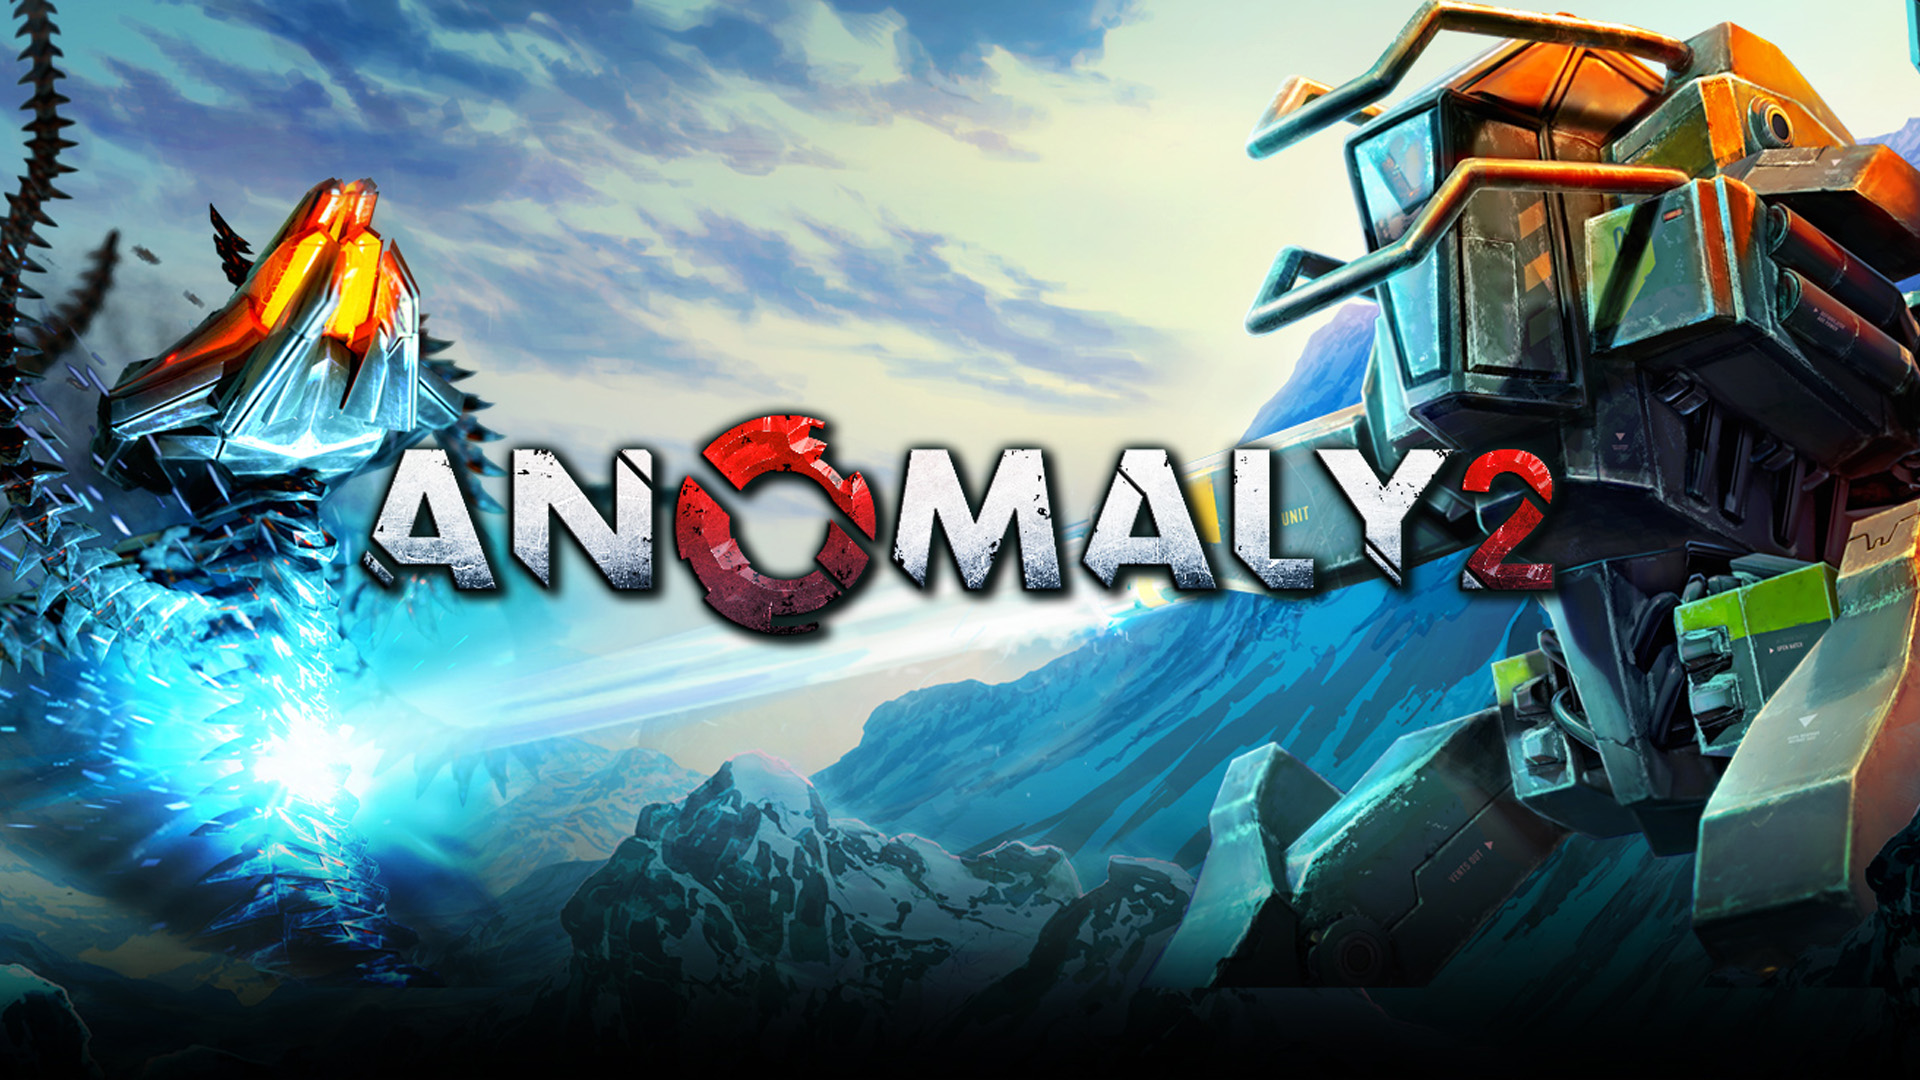 Anomaly HD Wallpaper Background Image Id